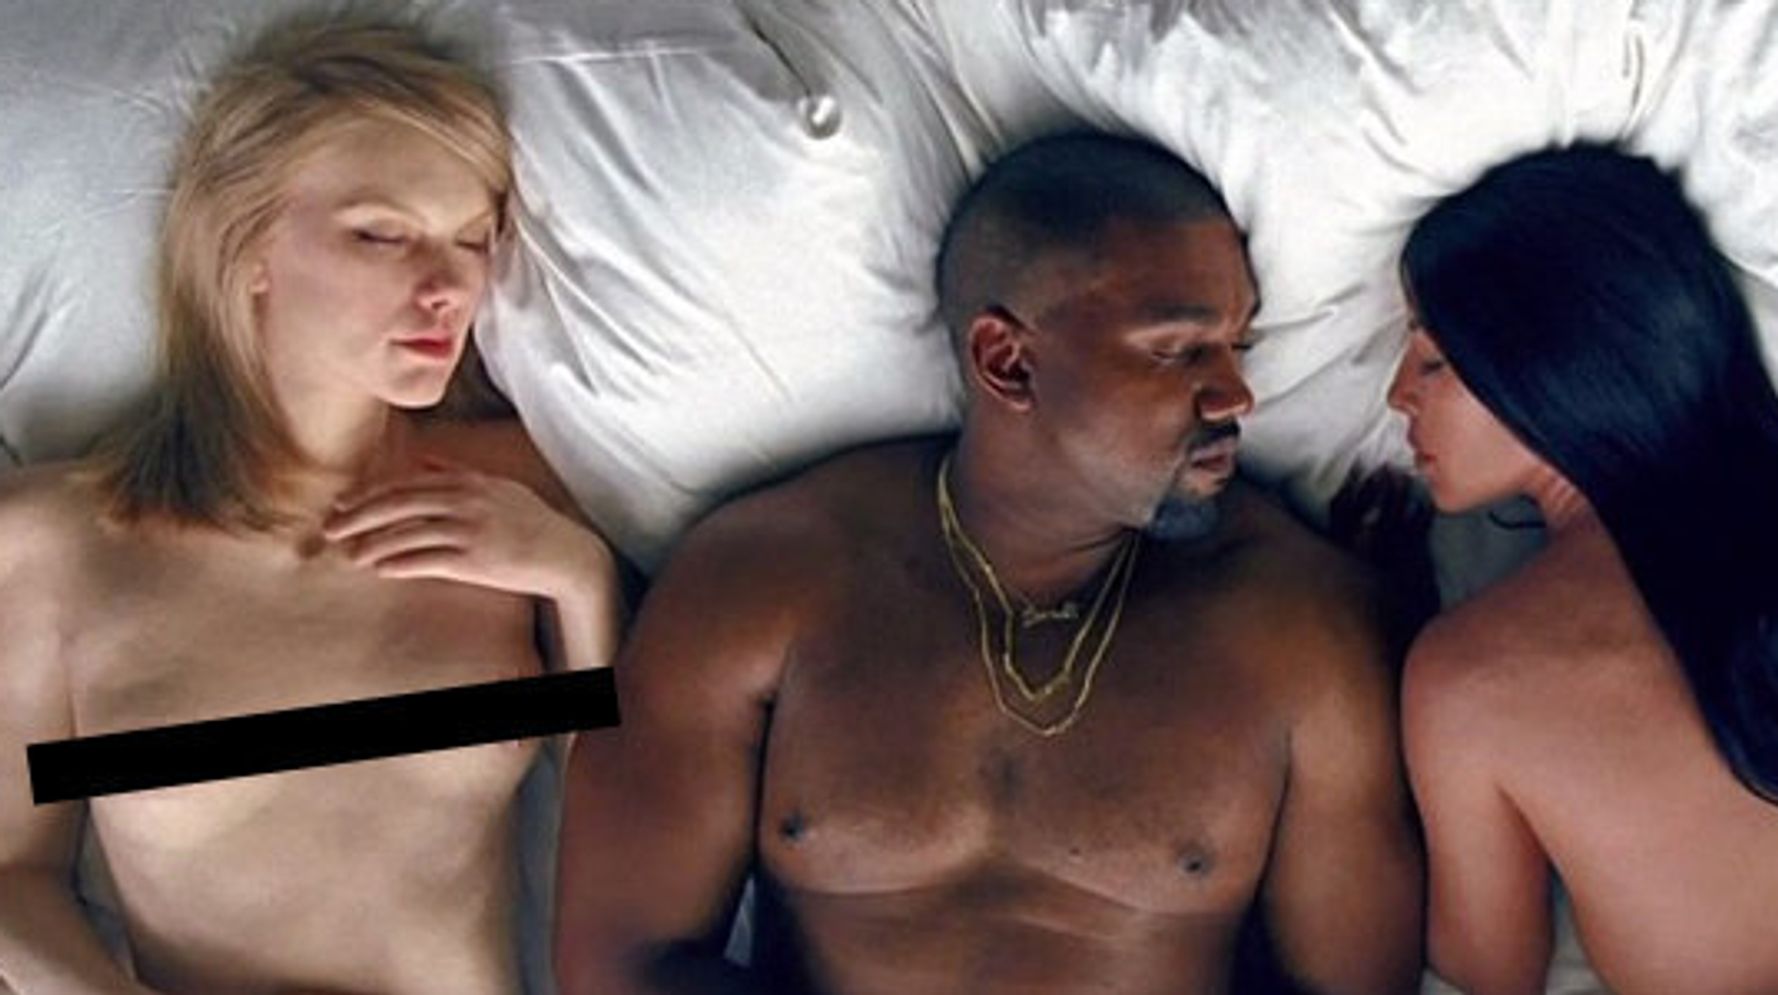 1778px x 995px - Kanye West's 'Famous' Video Features A Naked Taylor Swift, Kim Kardashian  And Donald Trump - But Who's Real? | HuffPost UK Entertainment